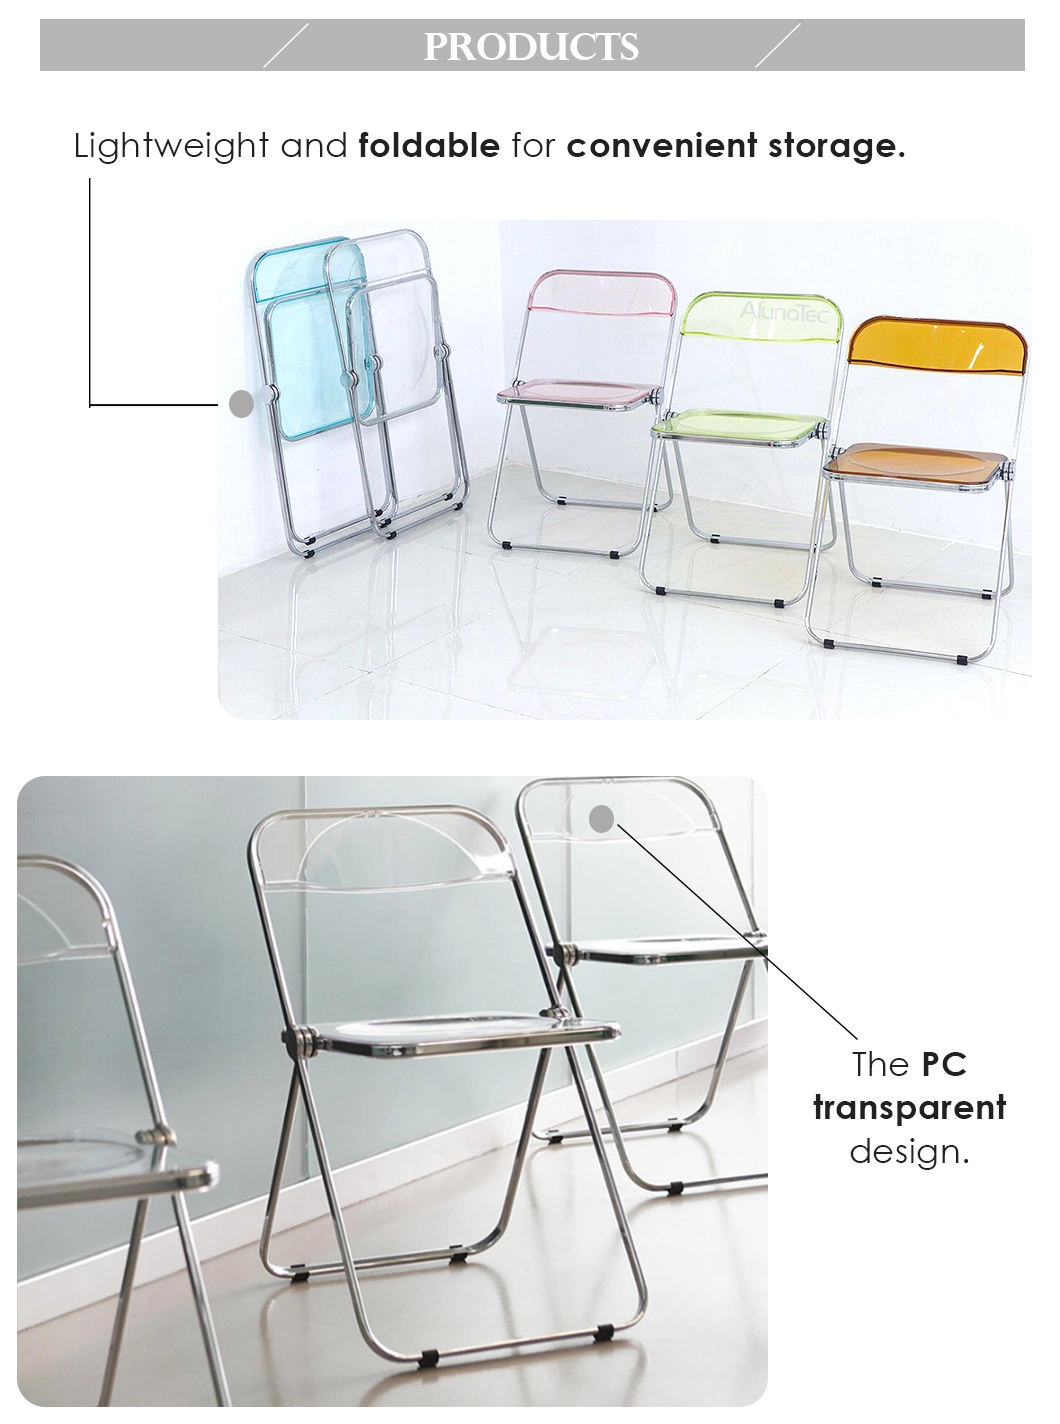 Easy Carry Modern Transparent Design Plastic Chair Light Weight Folding Chairs